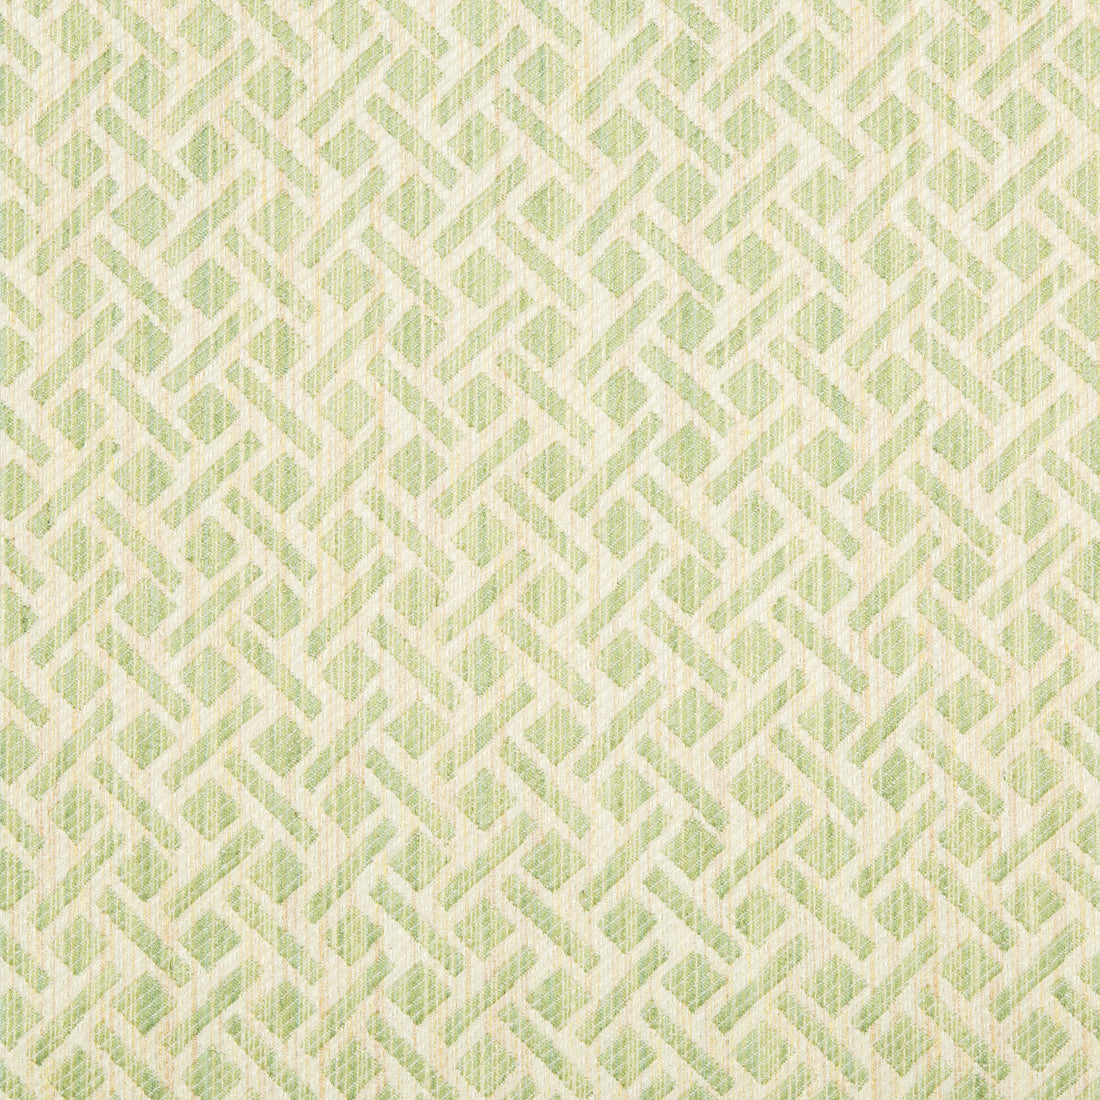 Comte Strie fabric in celery color - pattern 8017141.3.0 - by Brunschwig &amp; Fils in the Baronet collection